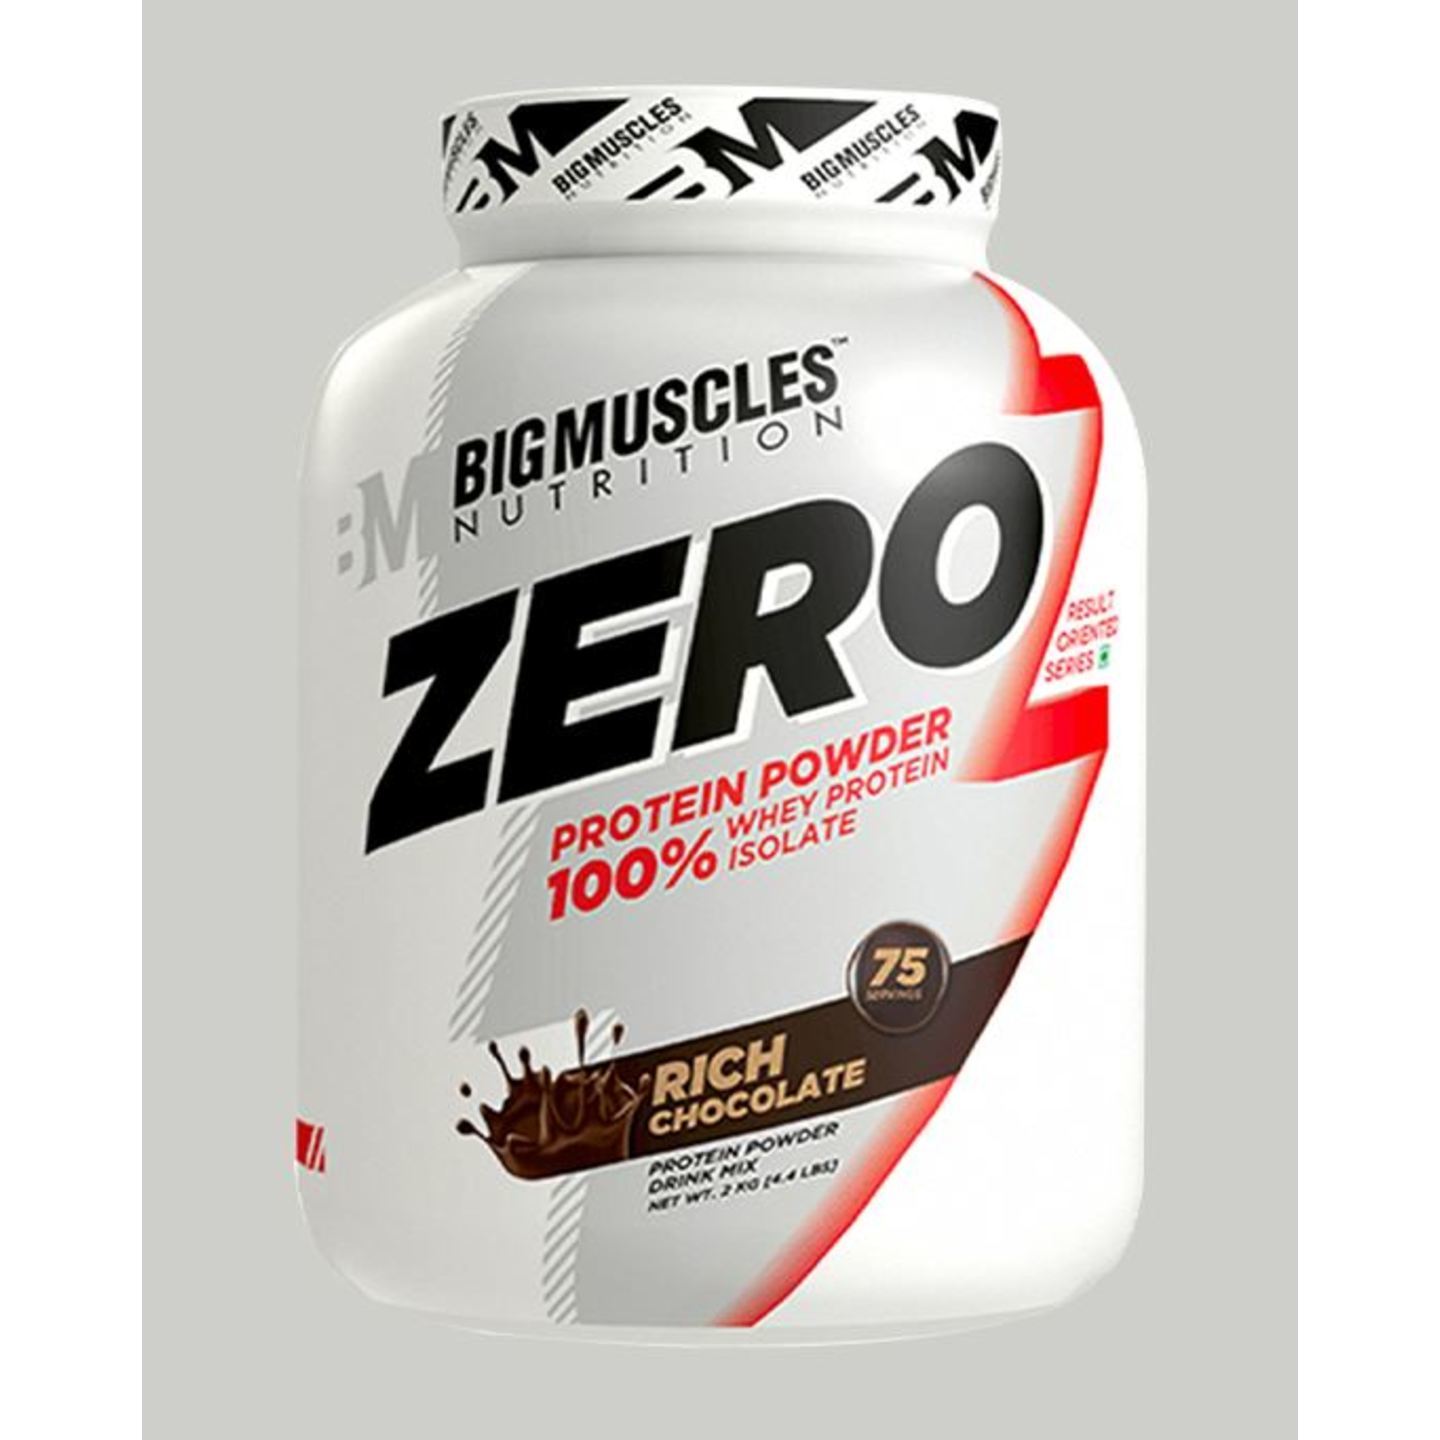 MastMart Bigmuscles Nutrition ZERO Protein Powder from 100 Whey Isolate Rich Chocolate 4.4 lbs